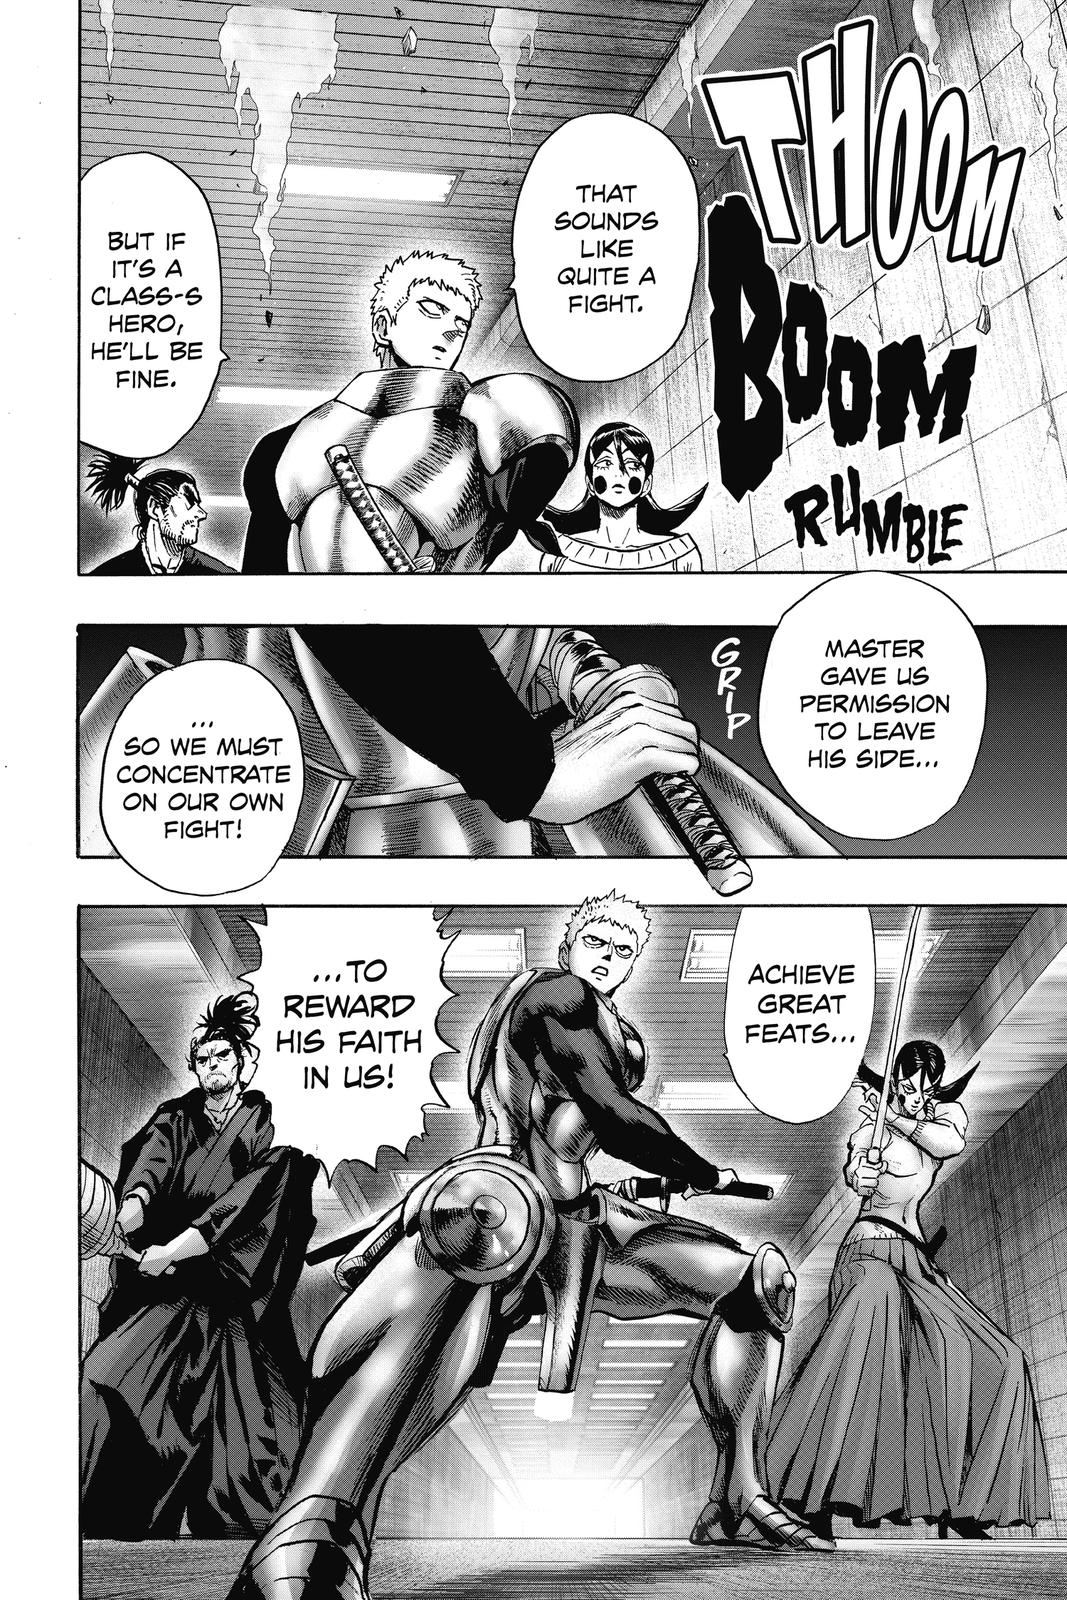 One-Punch Man, Punch 105 image 04